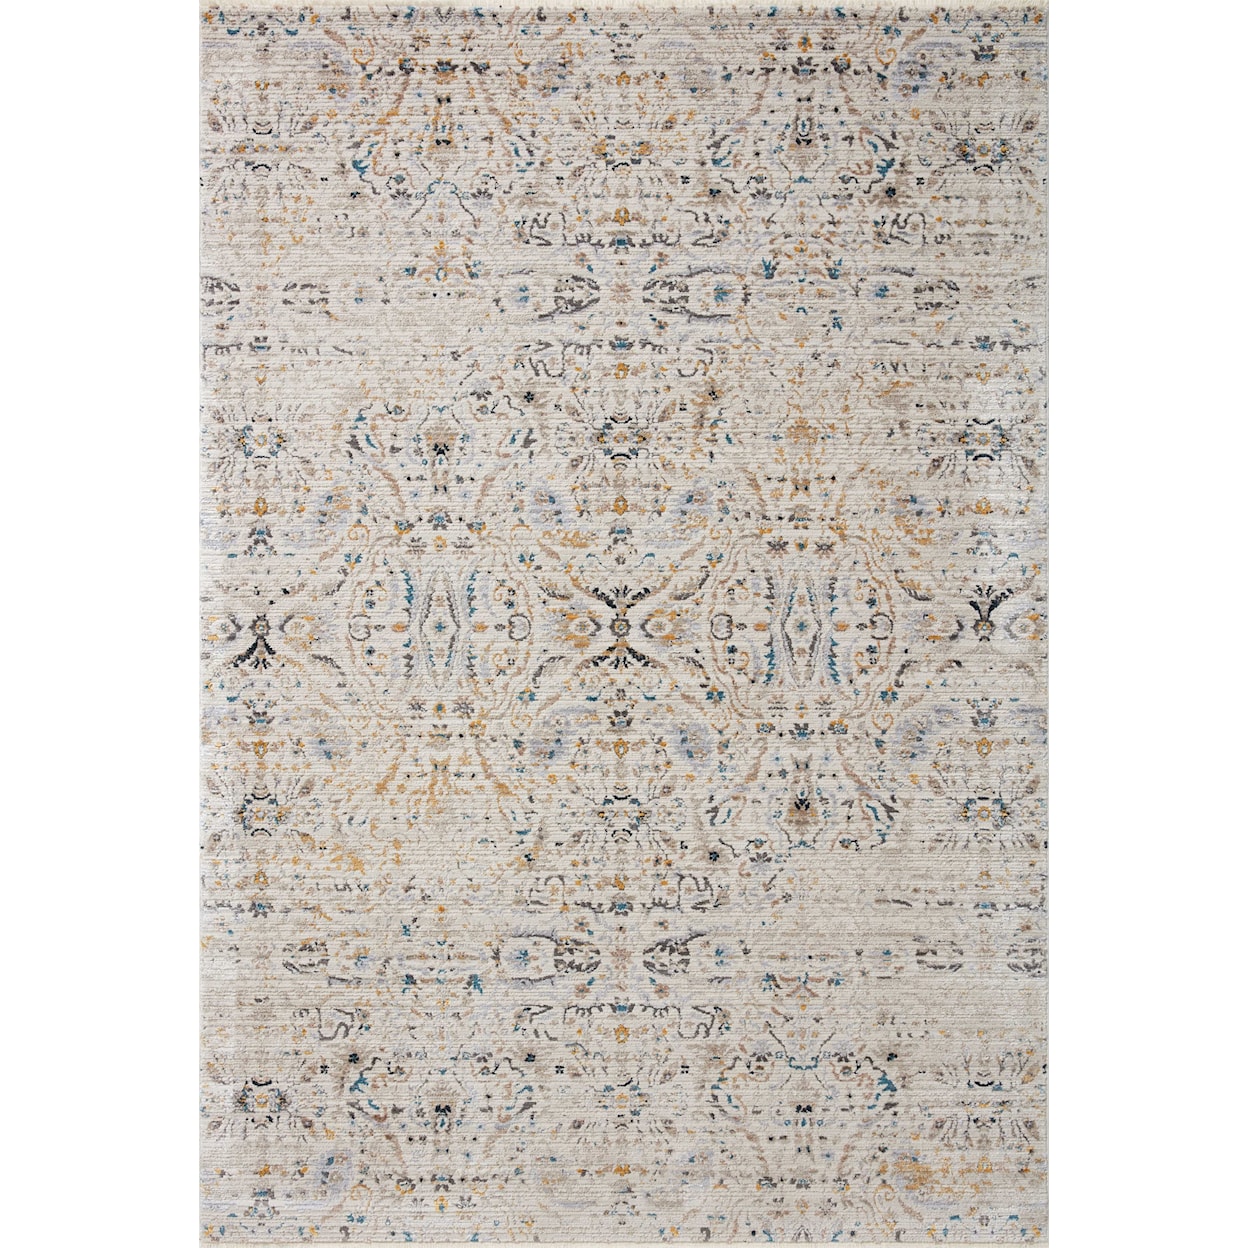 Loloi Rugs Leigh 5'3" x 7'6" Ivory / Straw Rug